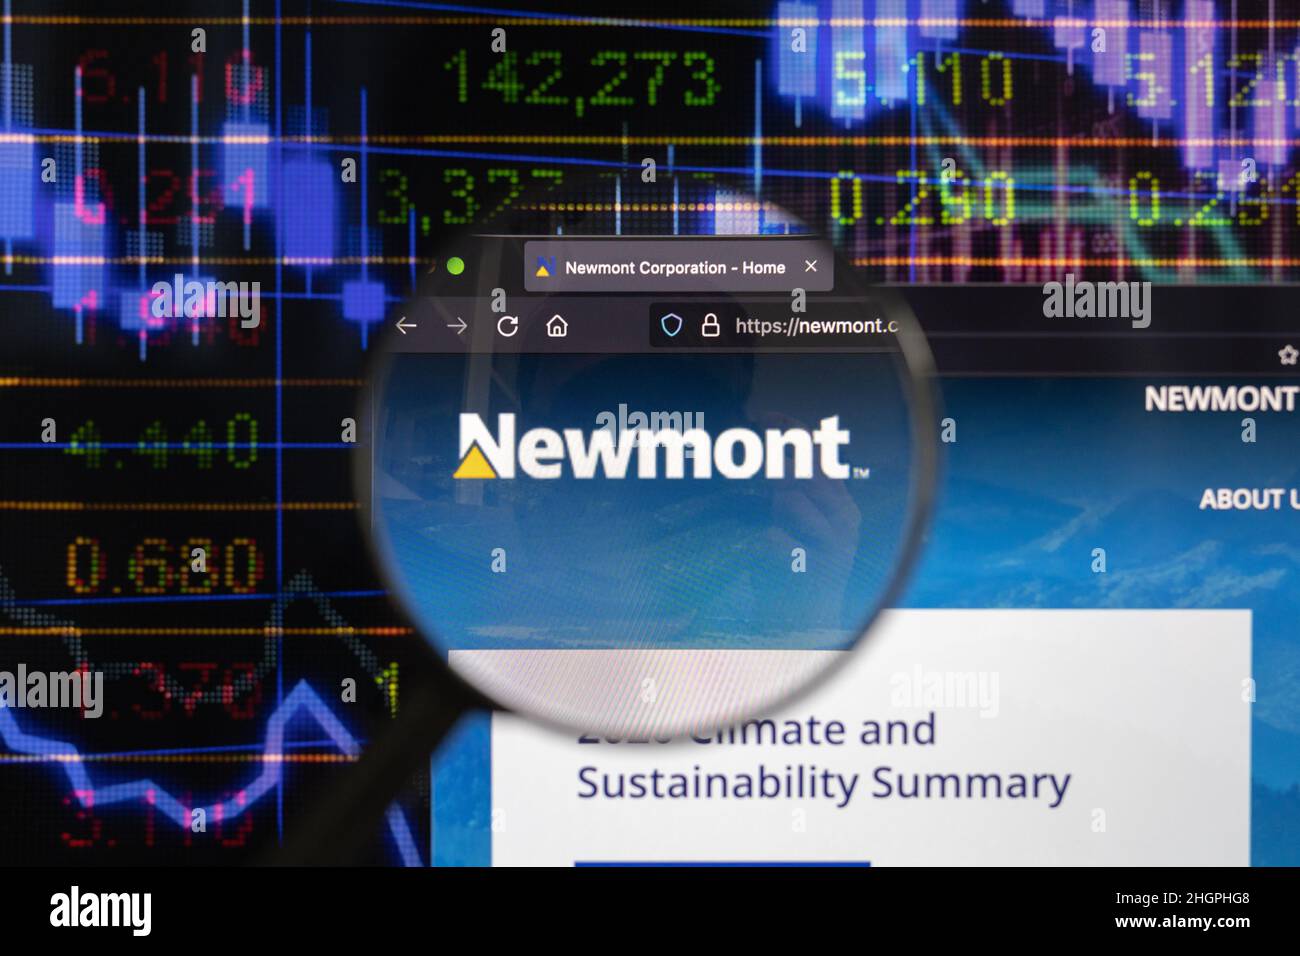 Newmont company logo on a website with blurry stock market developments in the background, seen on a computer screen through a magnifying glass. Stock Photo